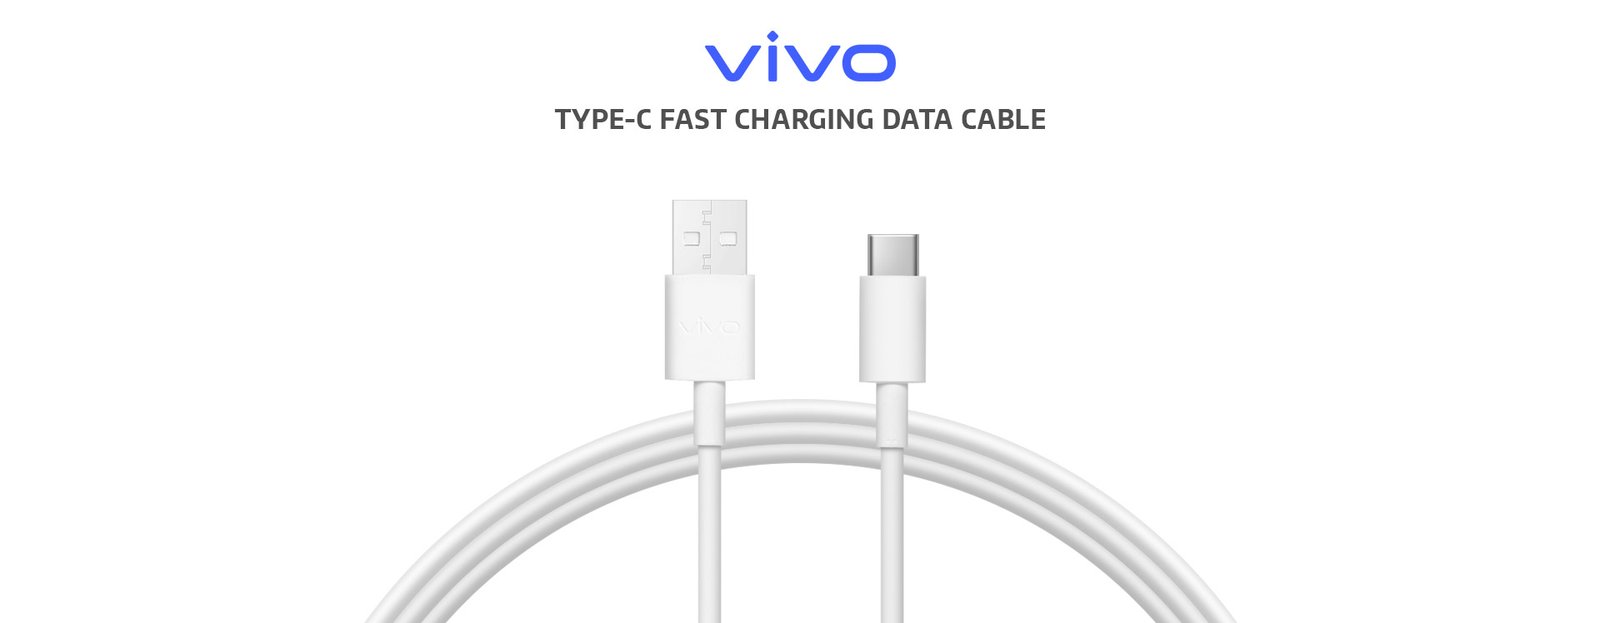 Vivo Fast Charging USB Cable Type-C